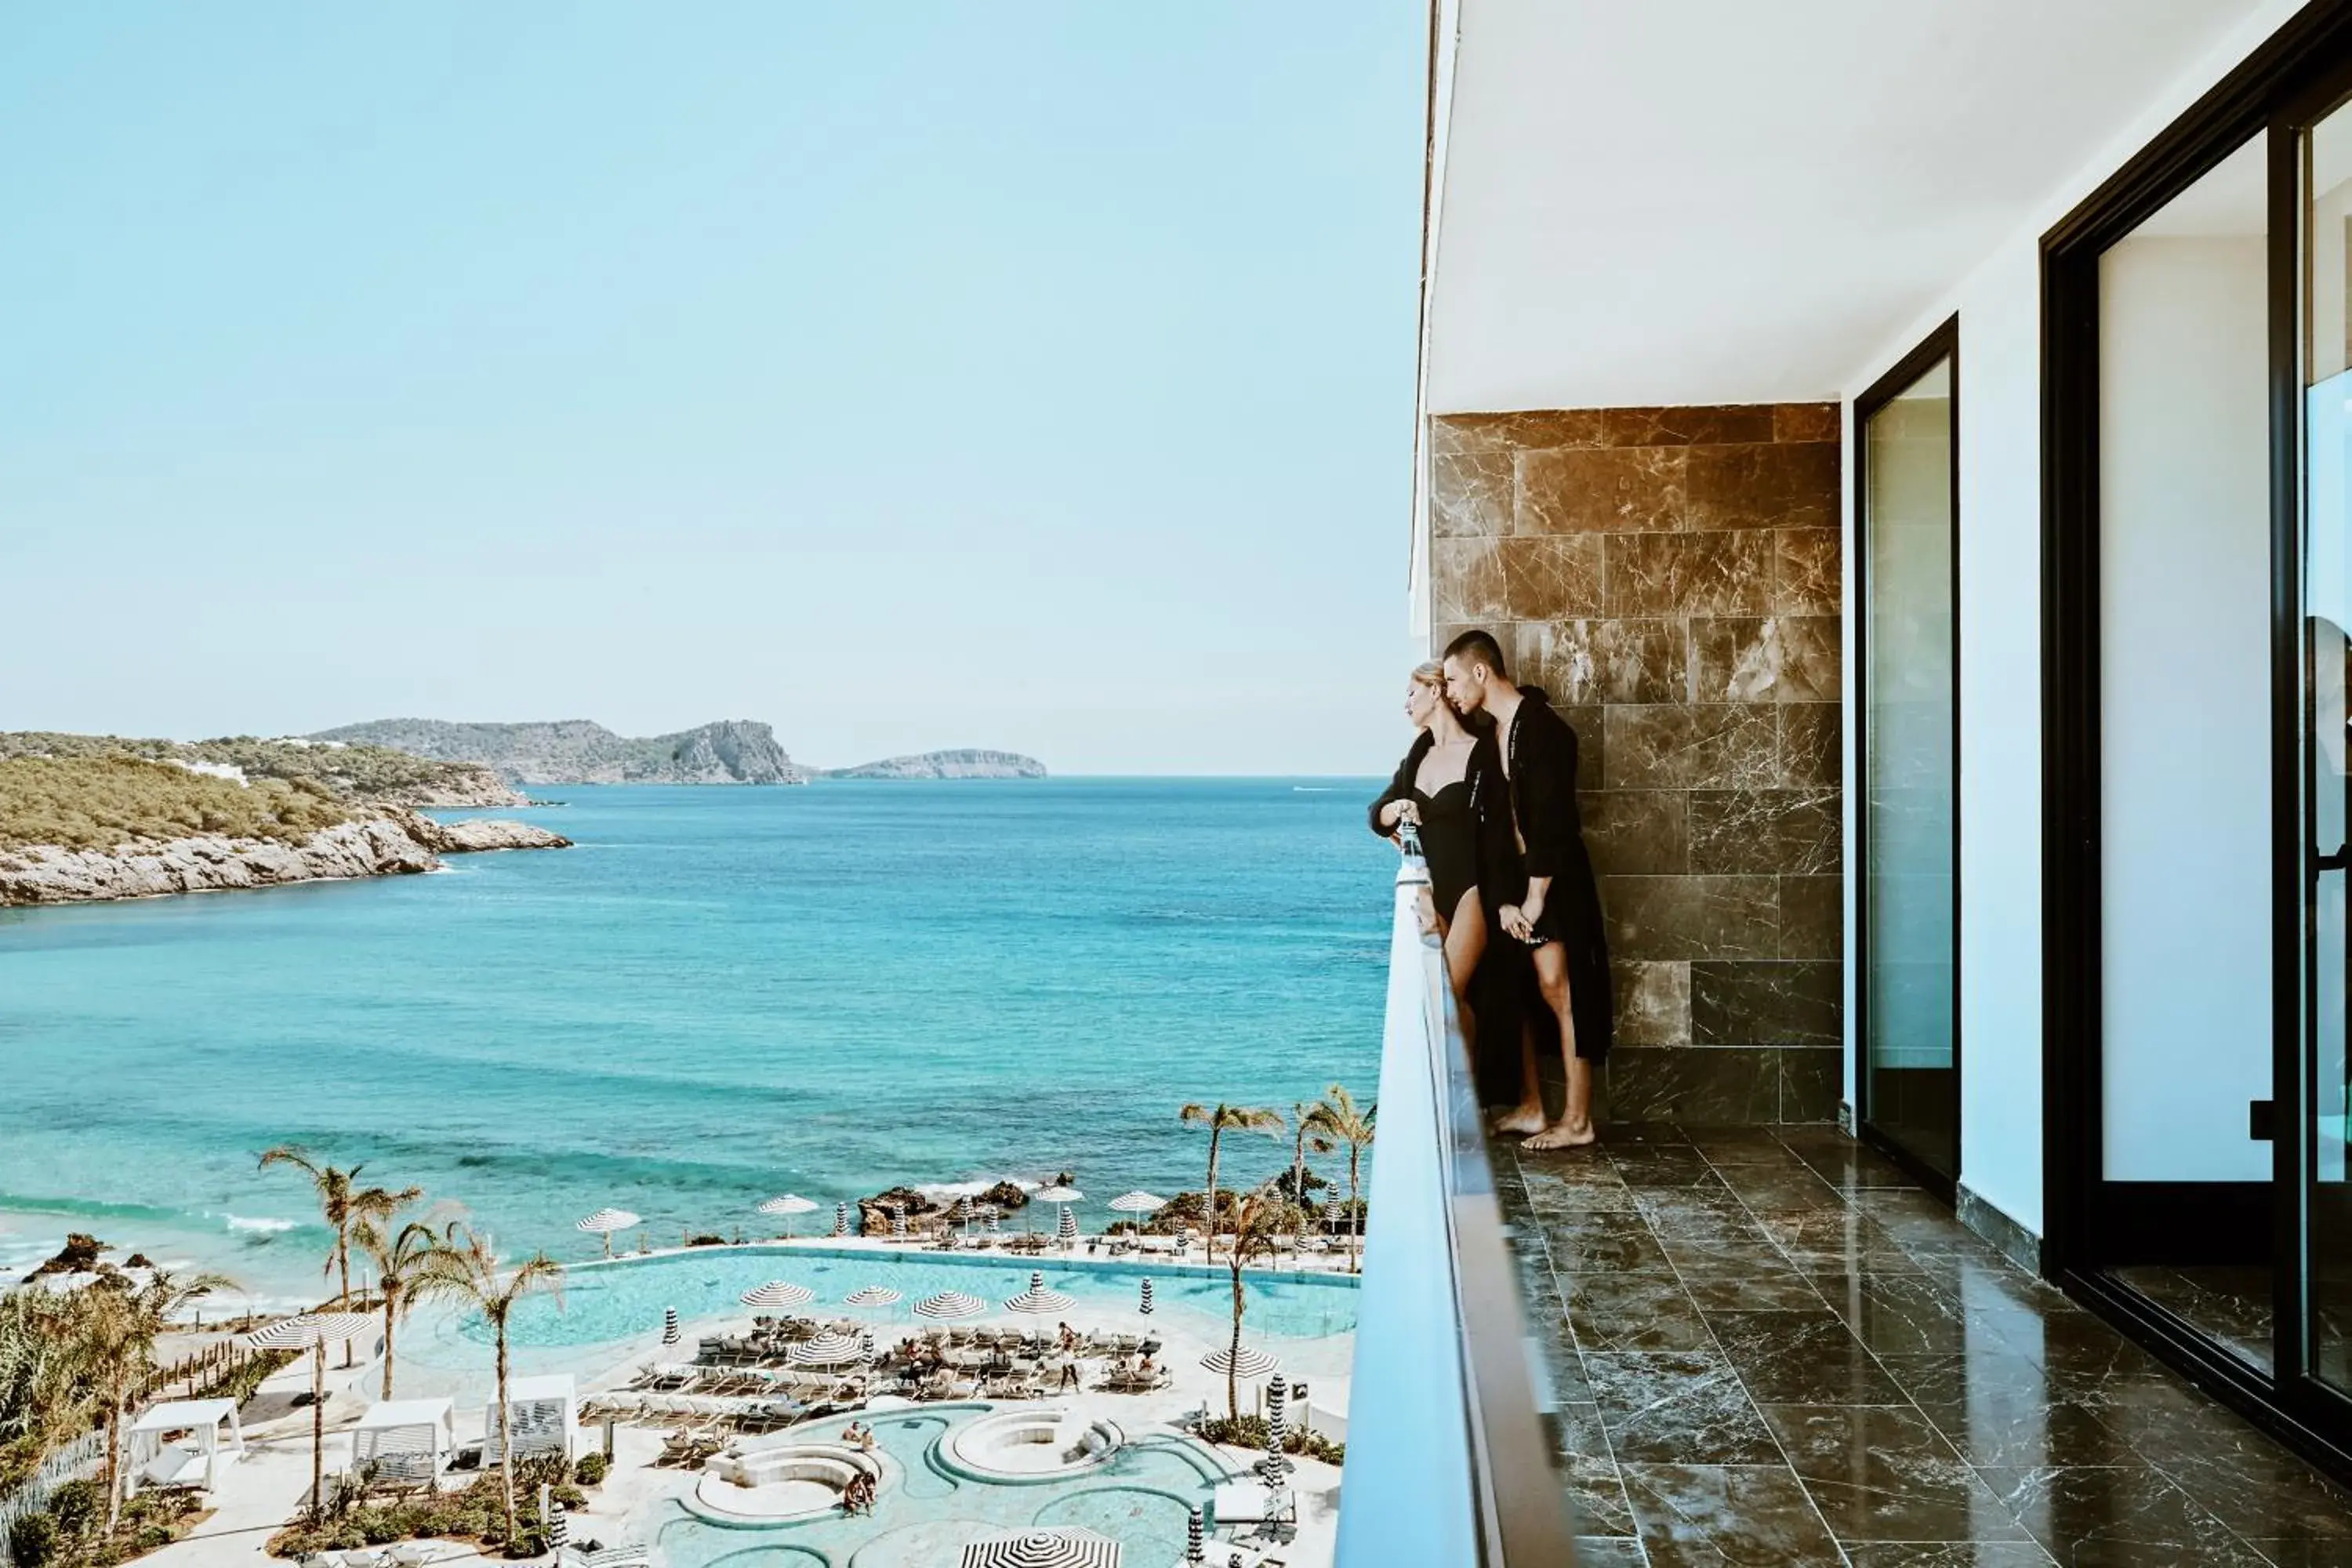 People in Bless Hotel Ibiza - The Leading Hotels of The World